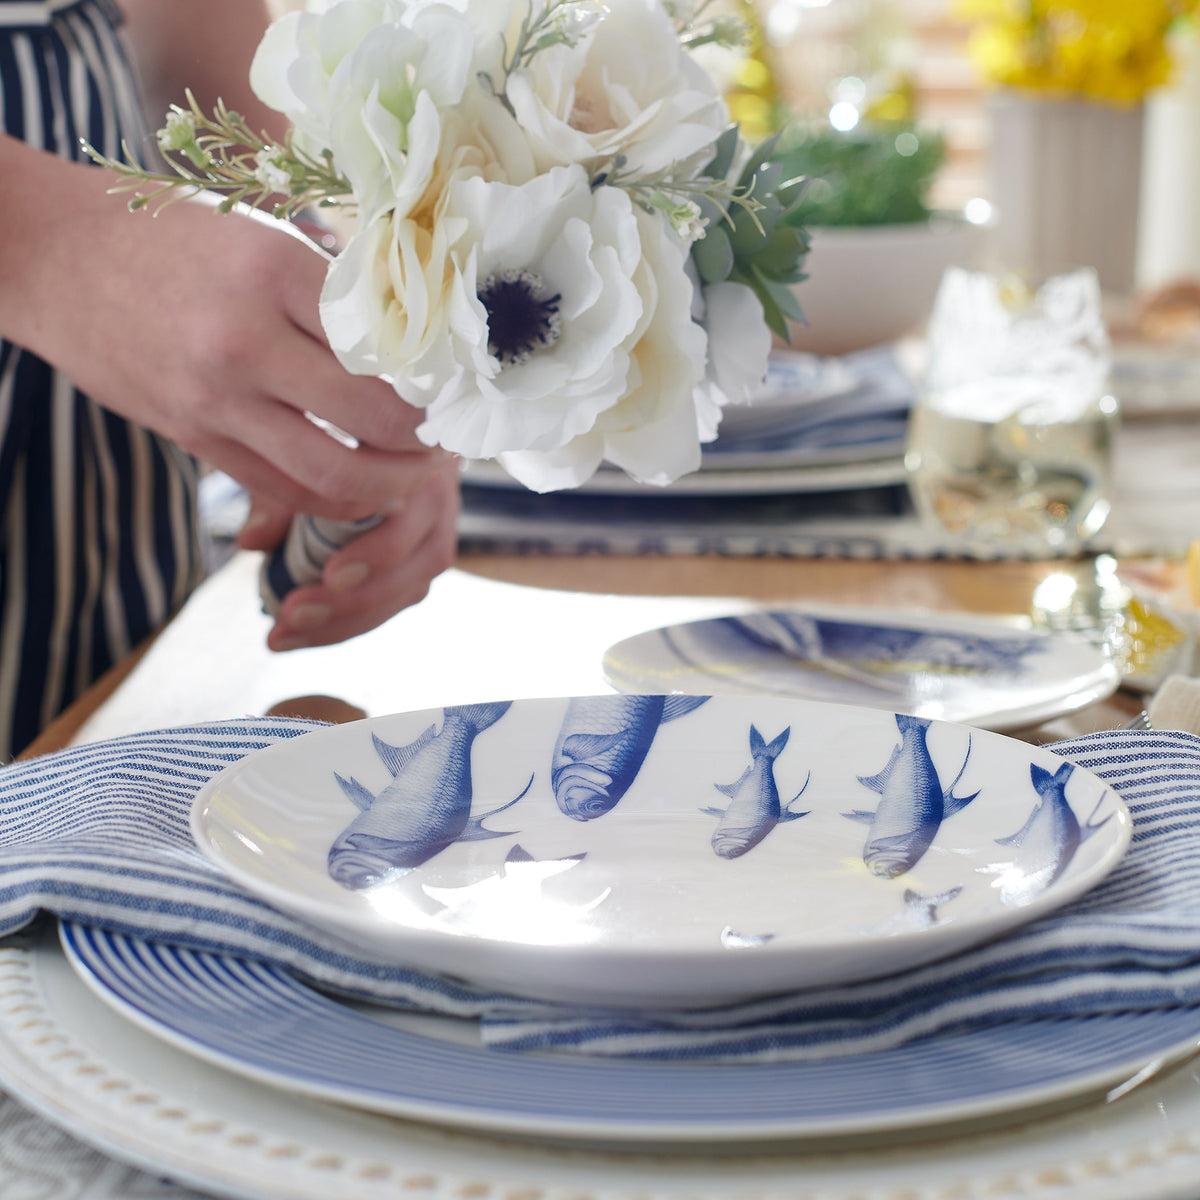 A woman is setting a table with blue and white School of Fish Coupe Salad Plates adorned with accent plates and flowers from Caskata Artisanal Home.